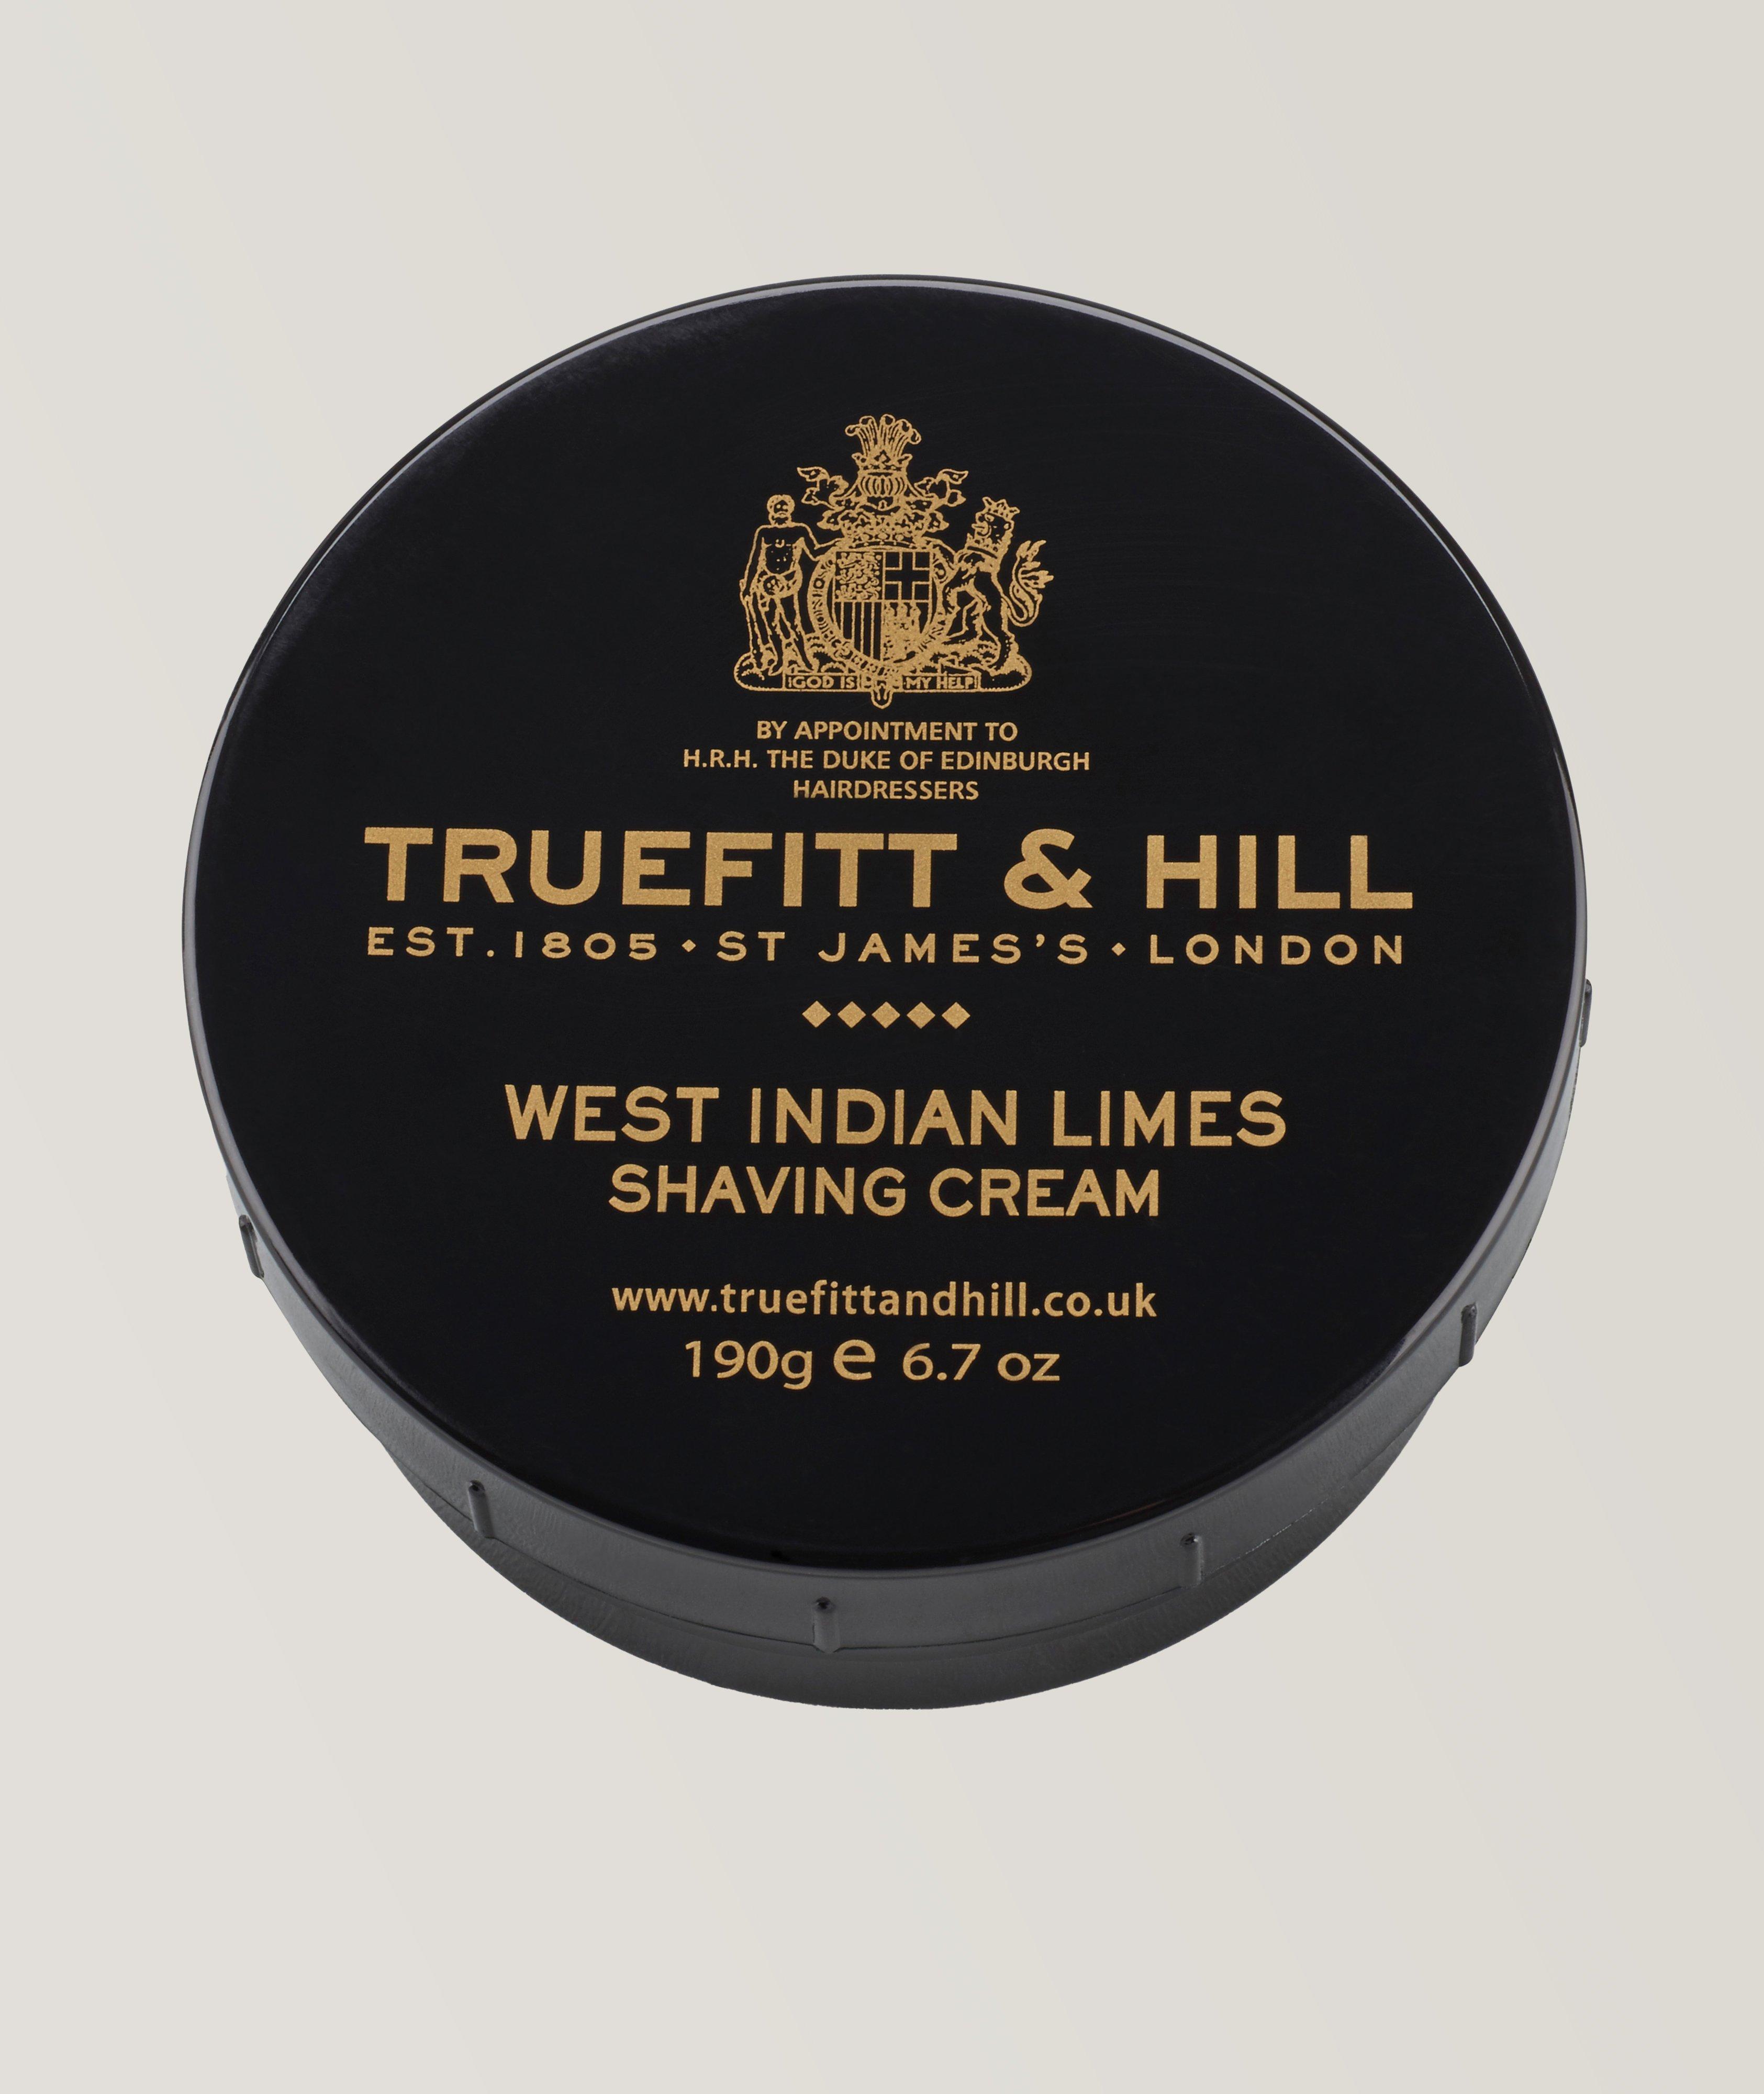 West Indian Limes Shaving Cream Bowl